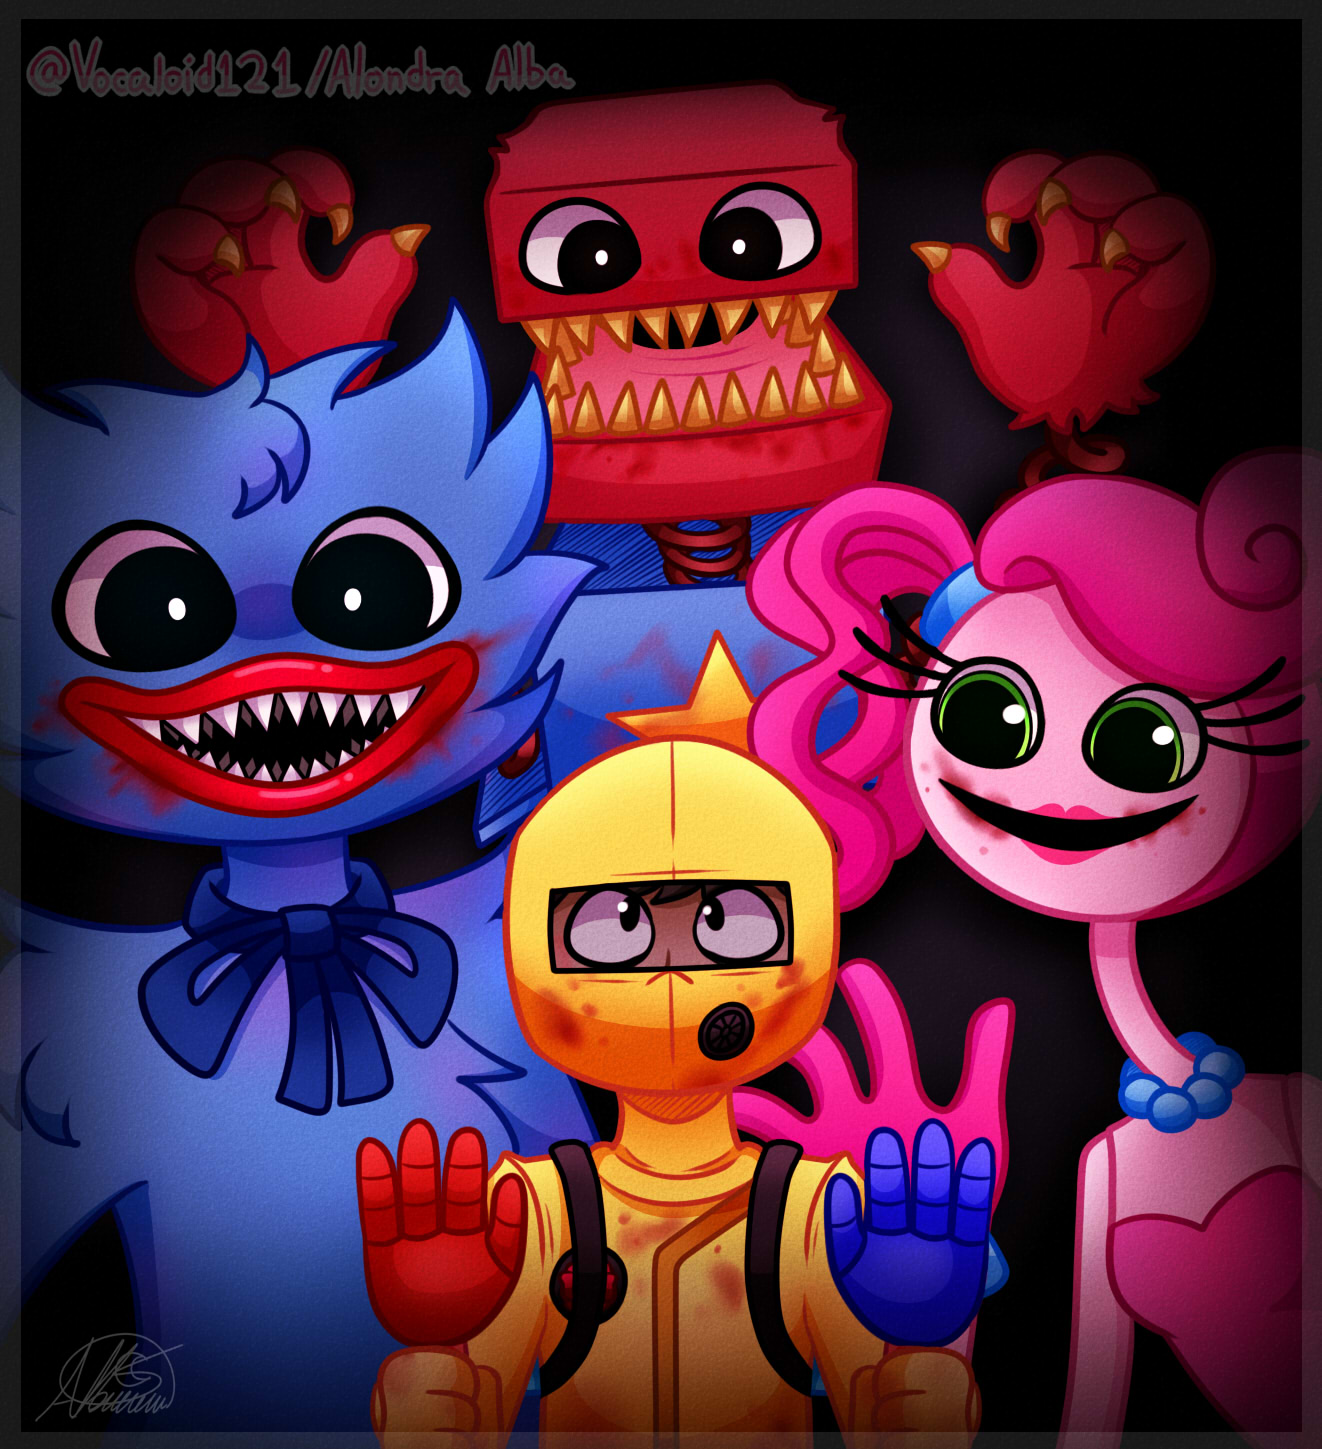 Me and my friends in project playtime by blueraptor9000 on DeviantArt